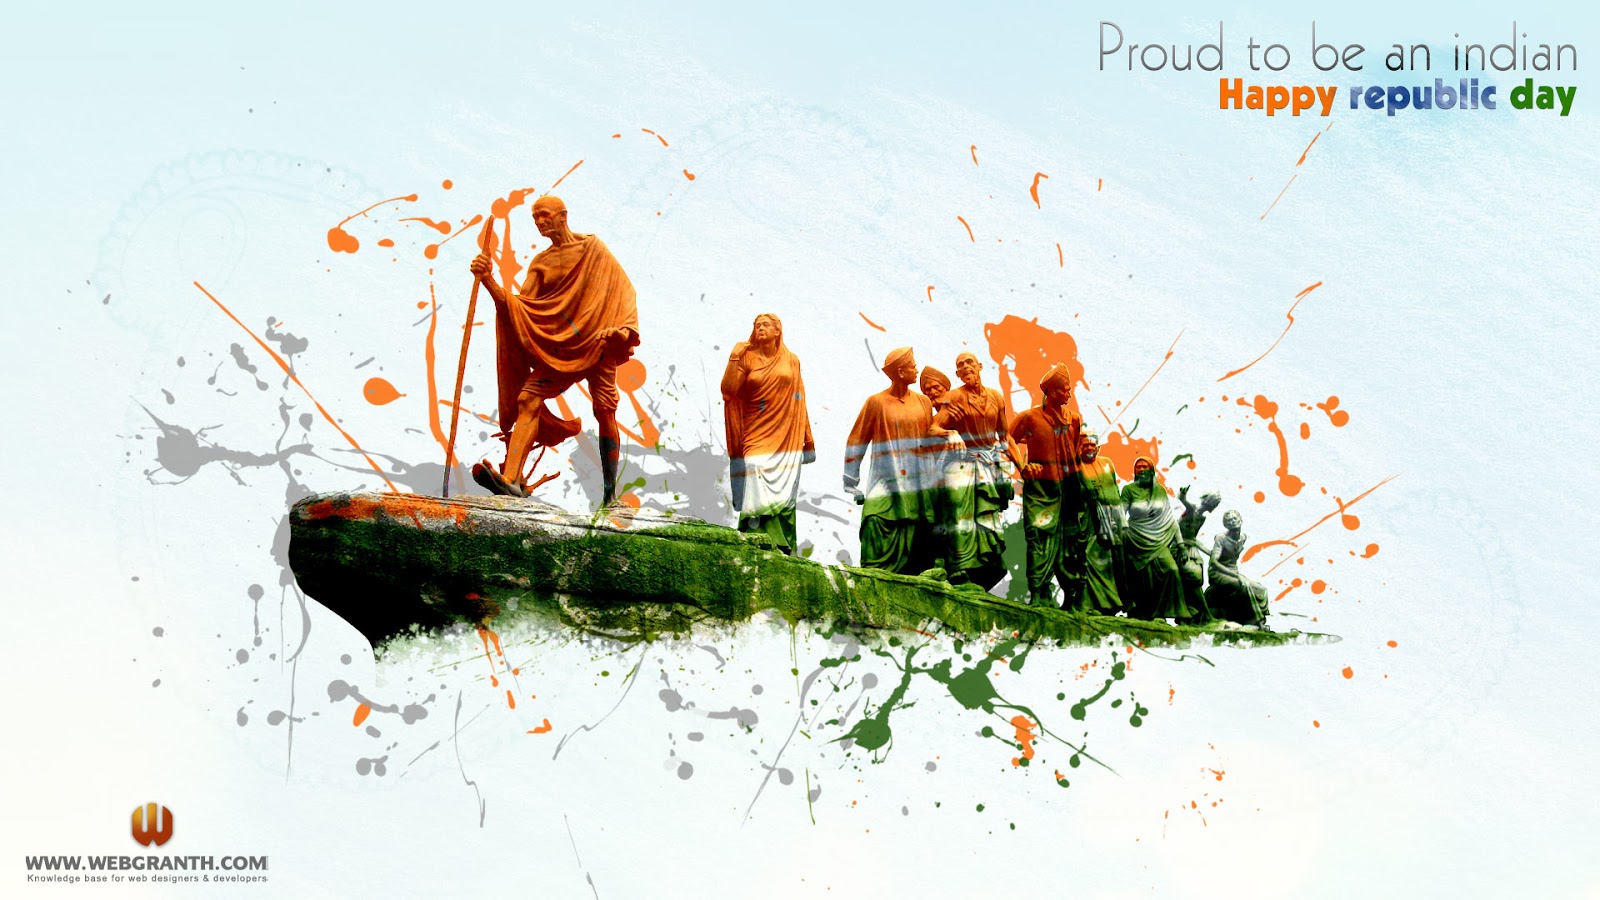 happy-republic-day-2013-wallpaper-photo-image-pictures.jpg